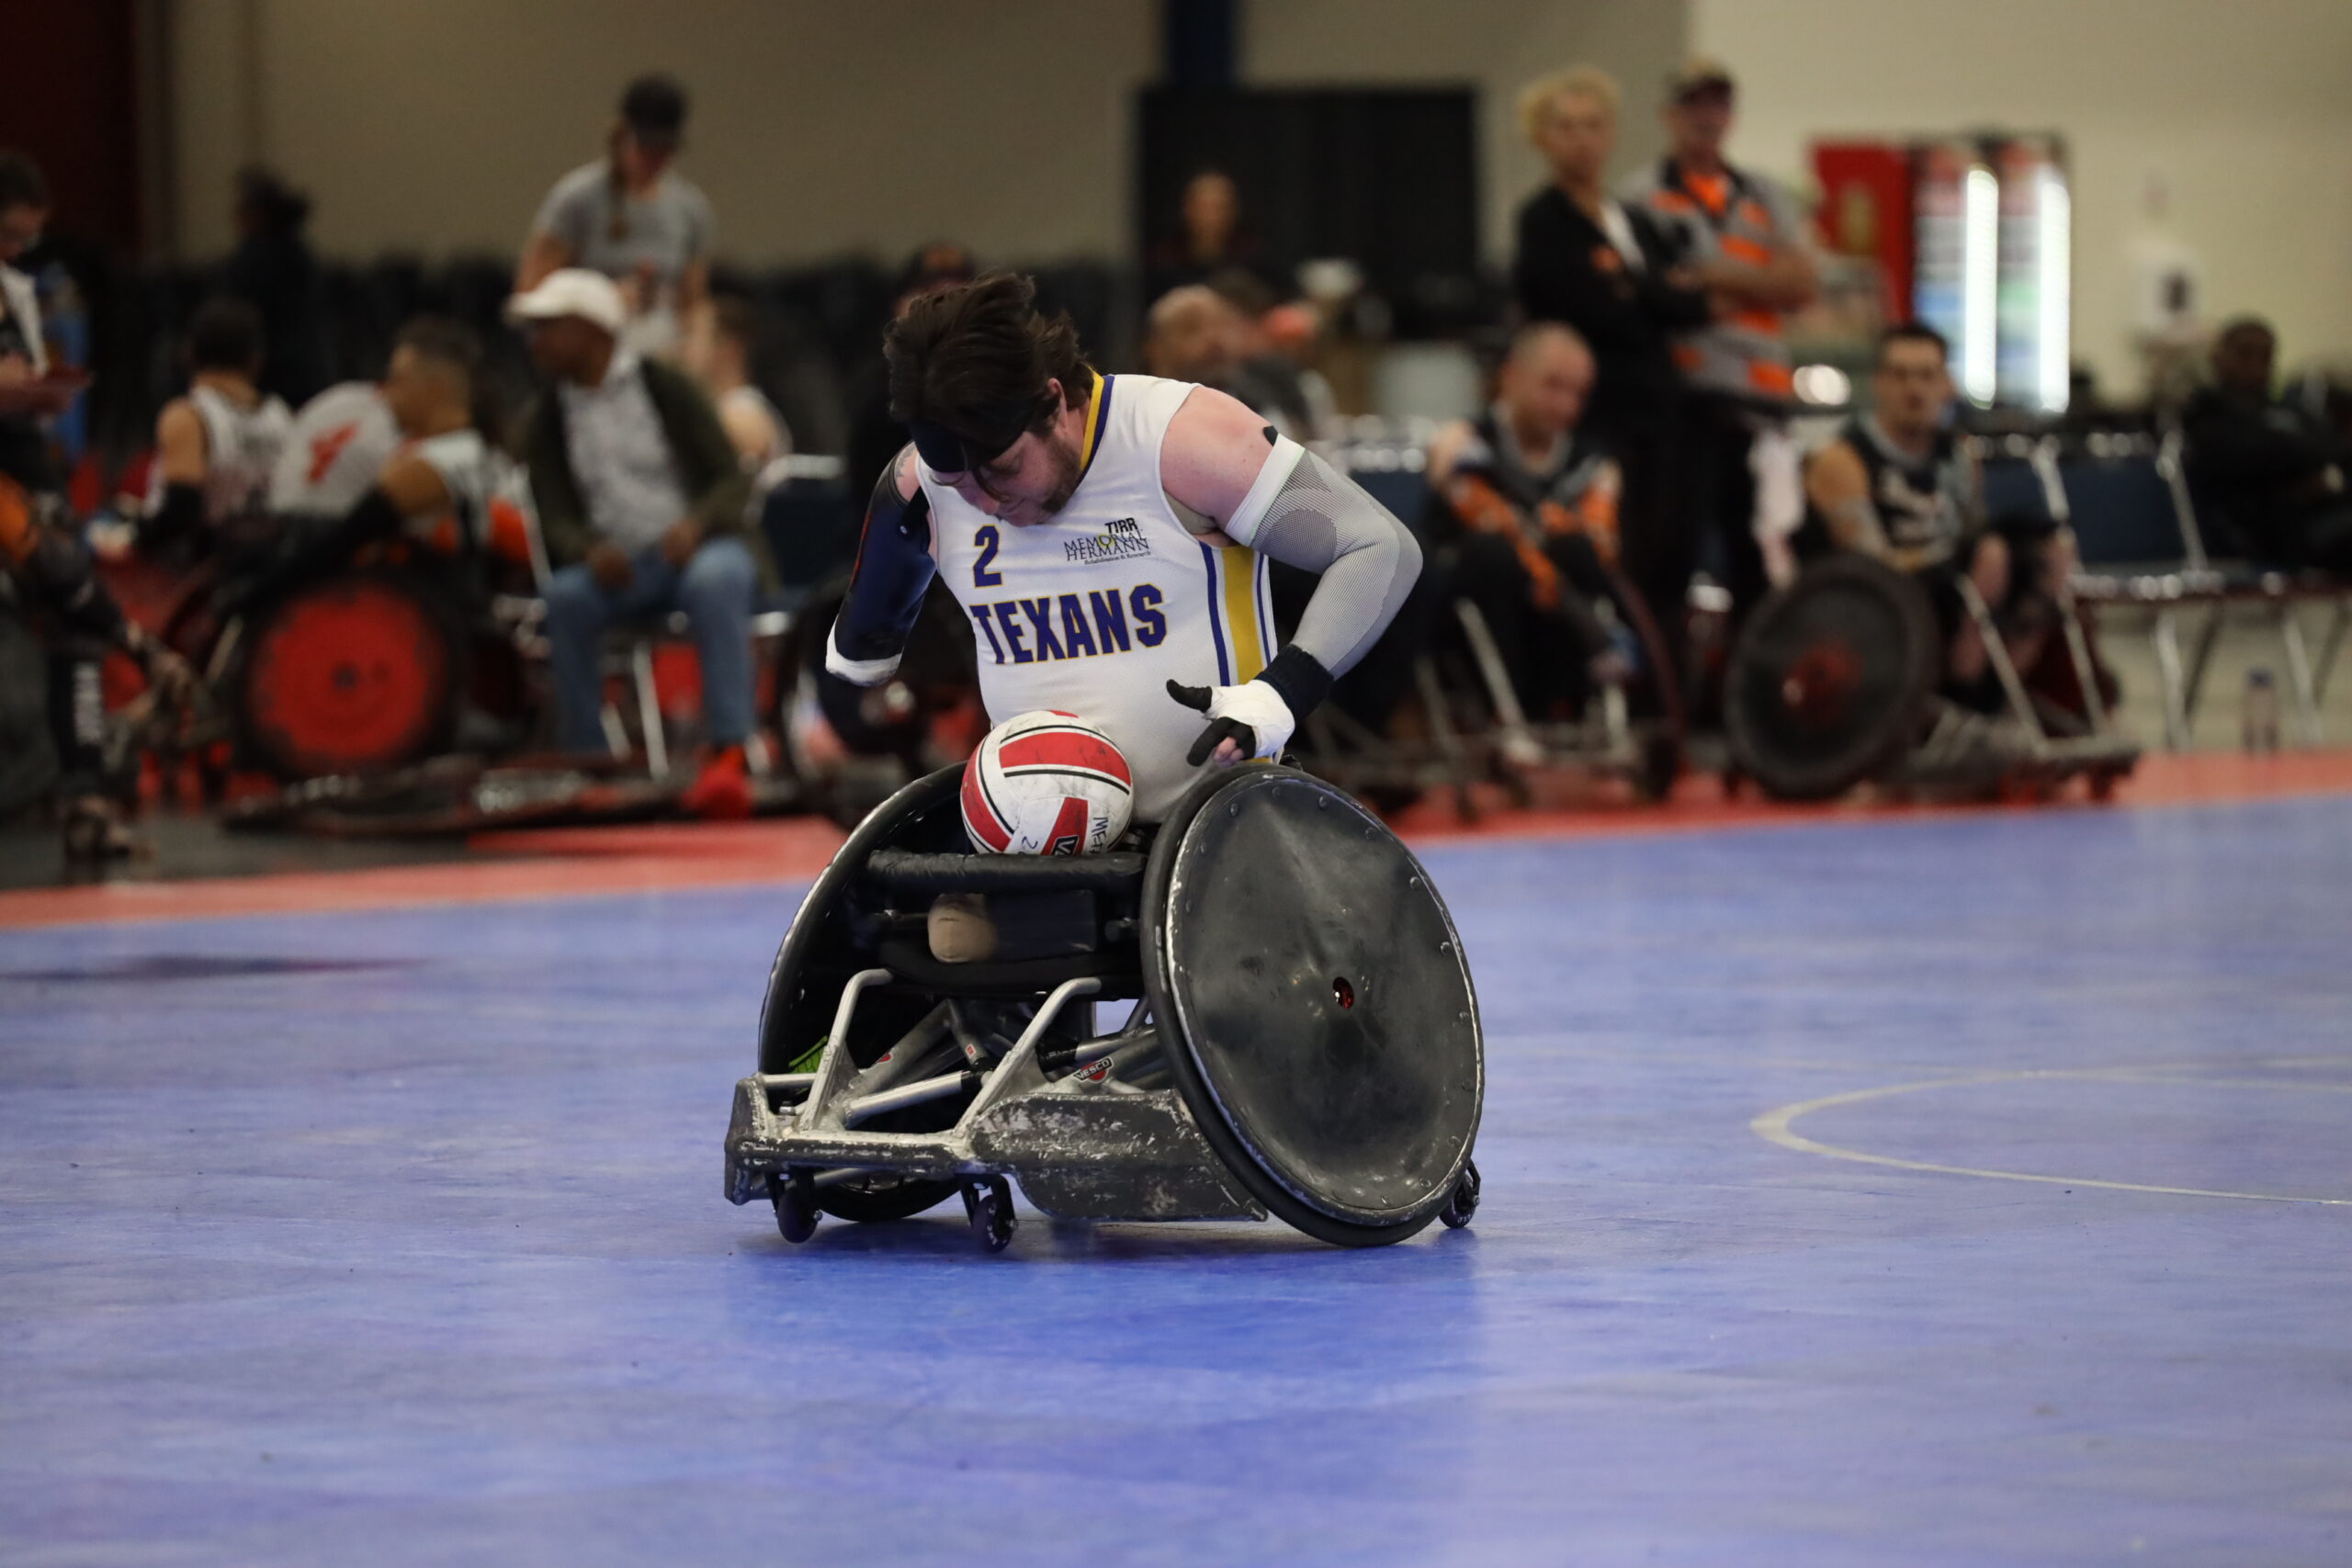 Photo of Timothy Brown pushing his rugby wheelchair during a tournament. Tim is wearing a white TIRR Texans #2 jersey.